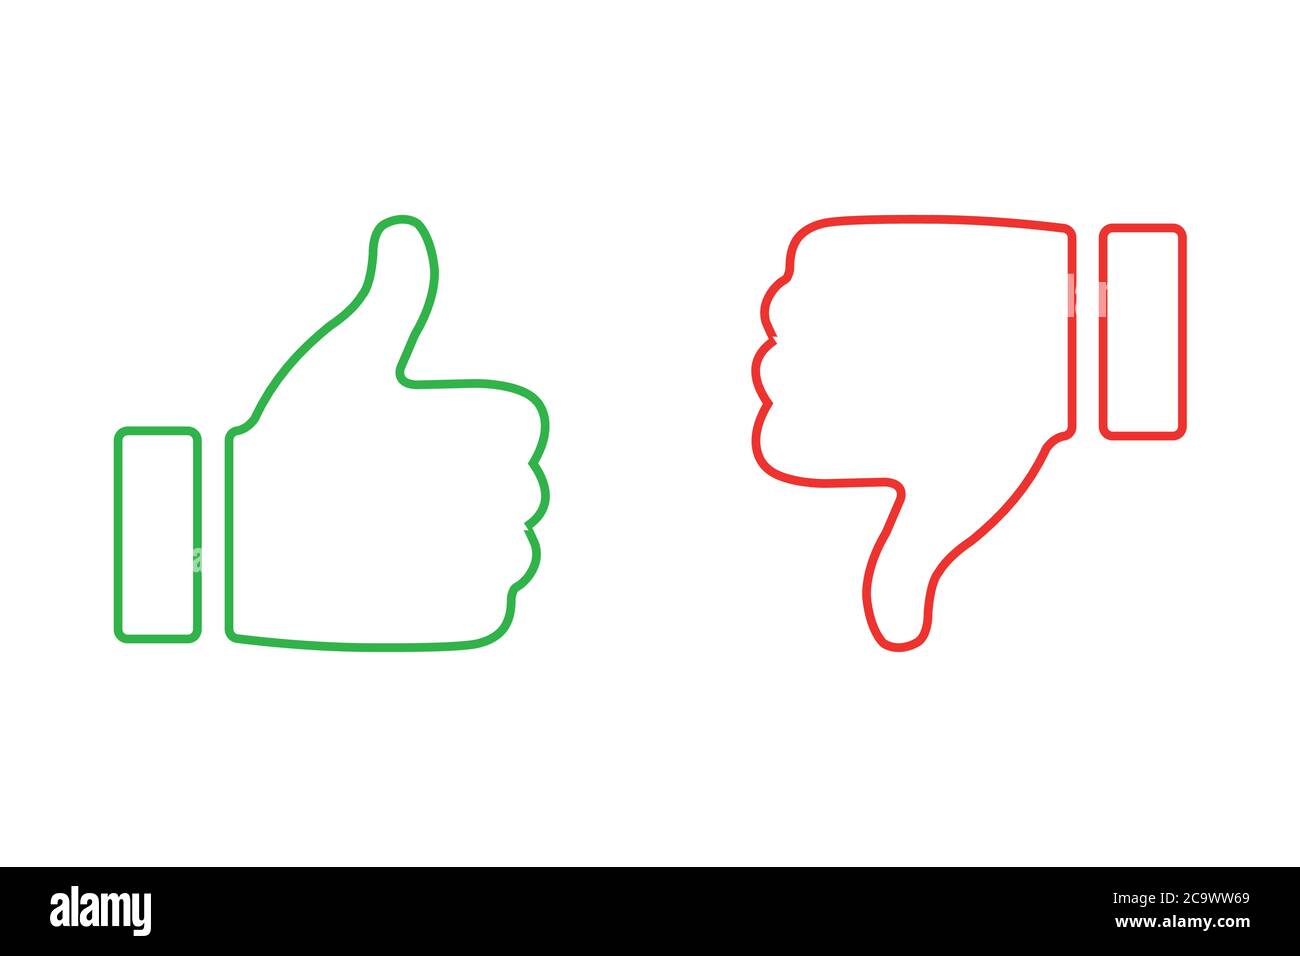 Like and dislike icons set. Thumbs up and thumbs down. Vector illustration. Stock Vector